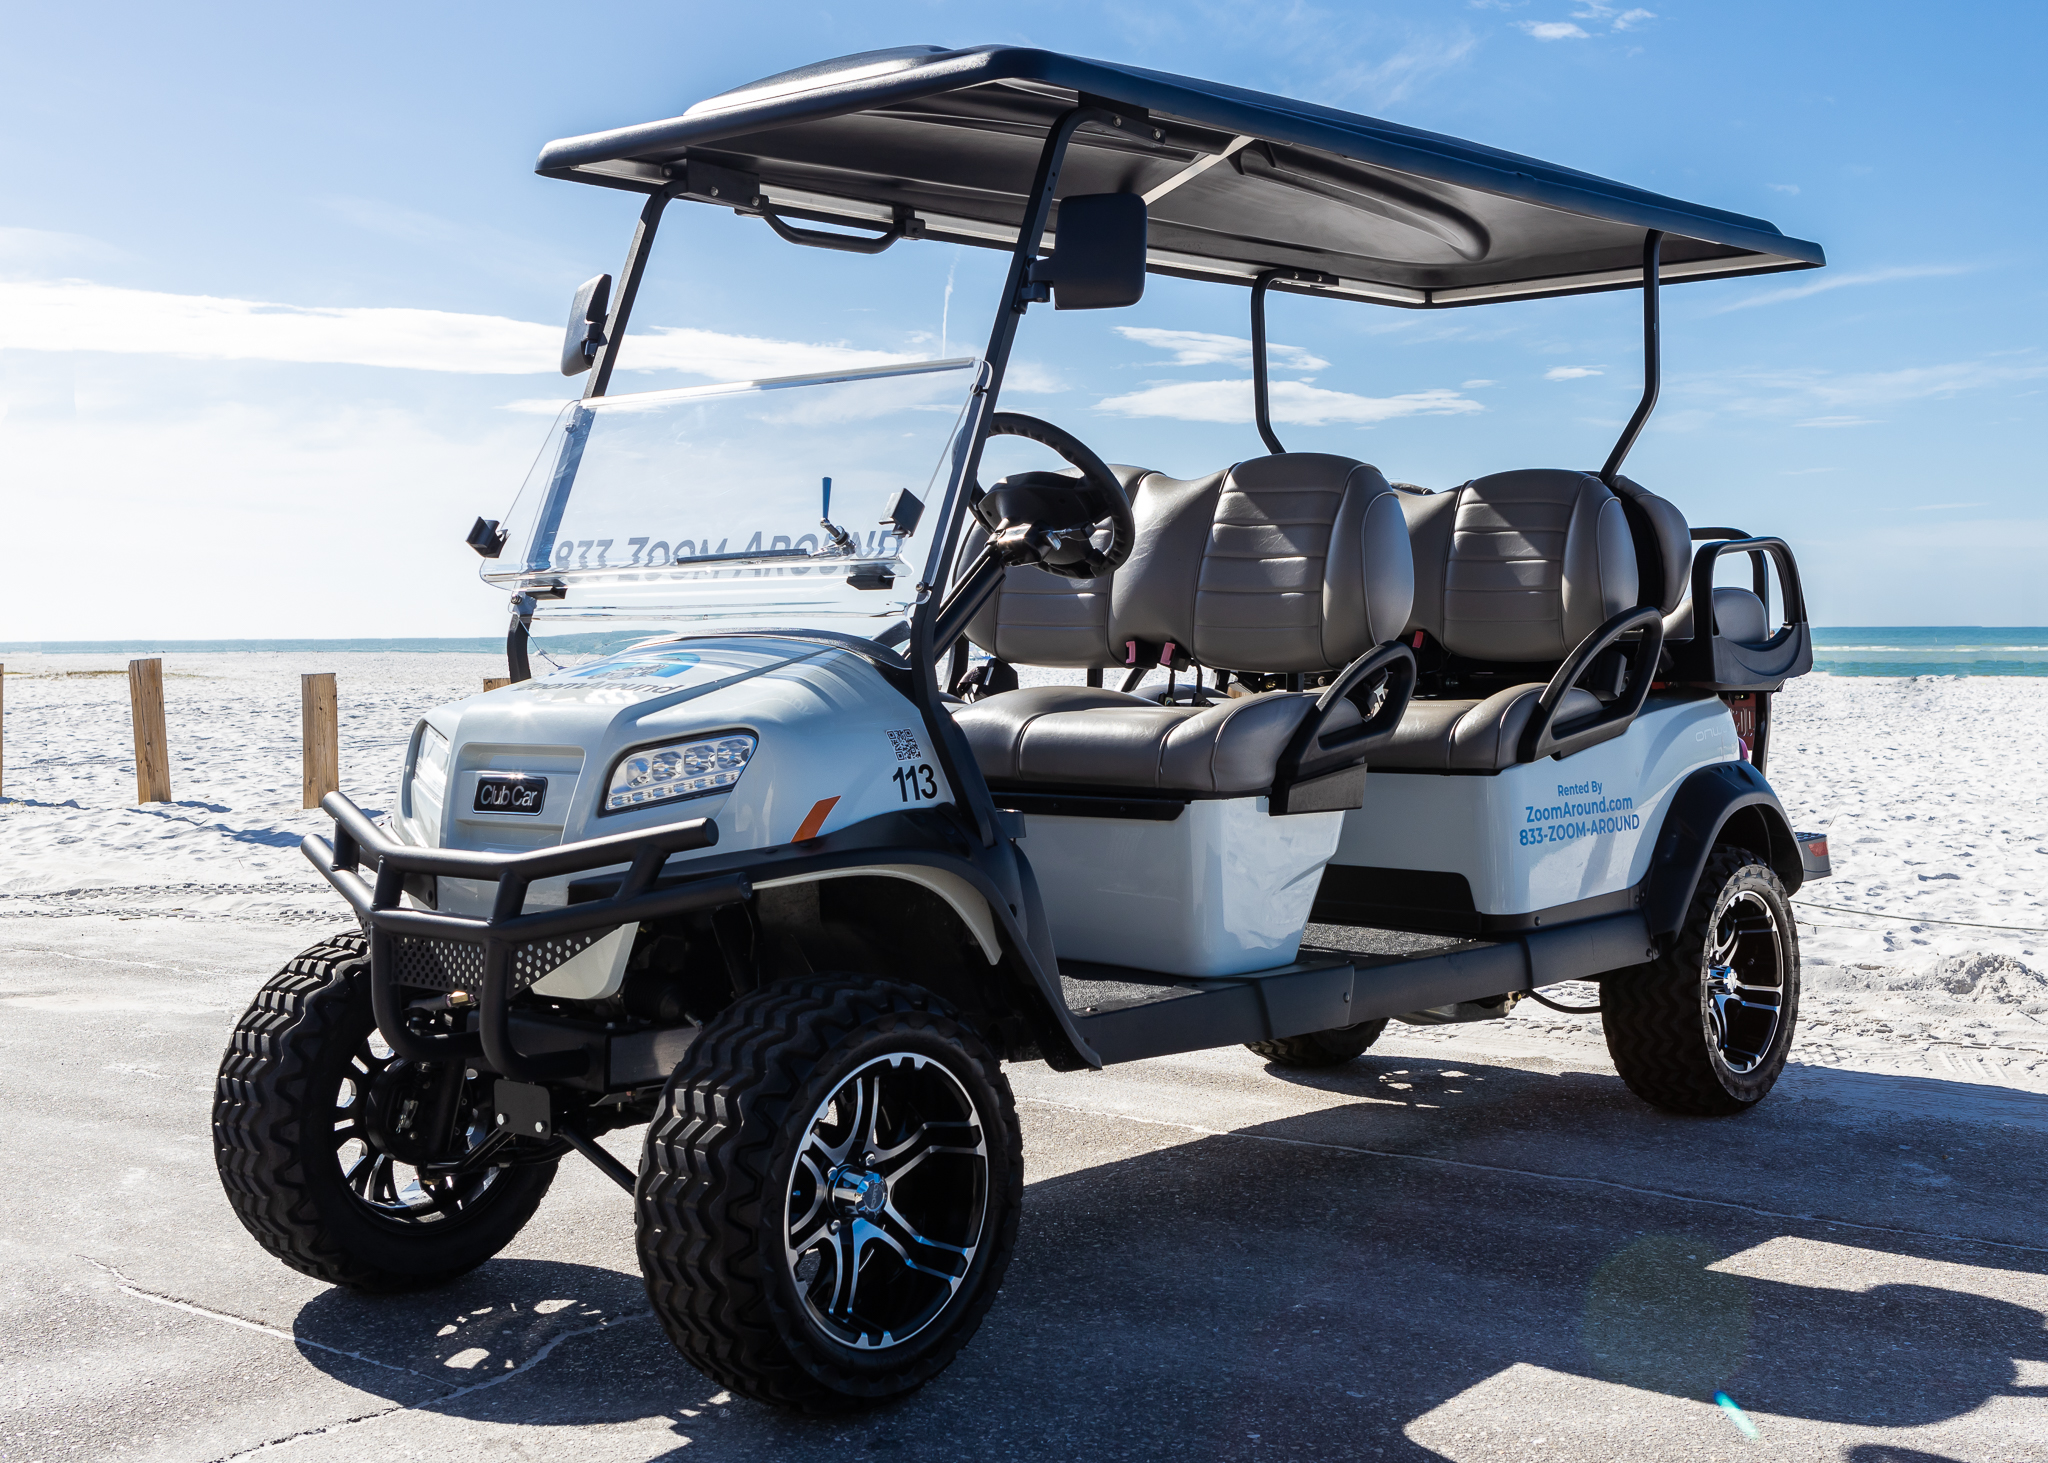 6 seater golf cart for rent on Anna Maria Island and Siesta Key